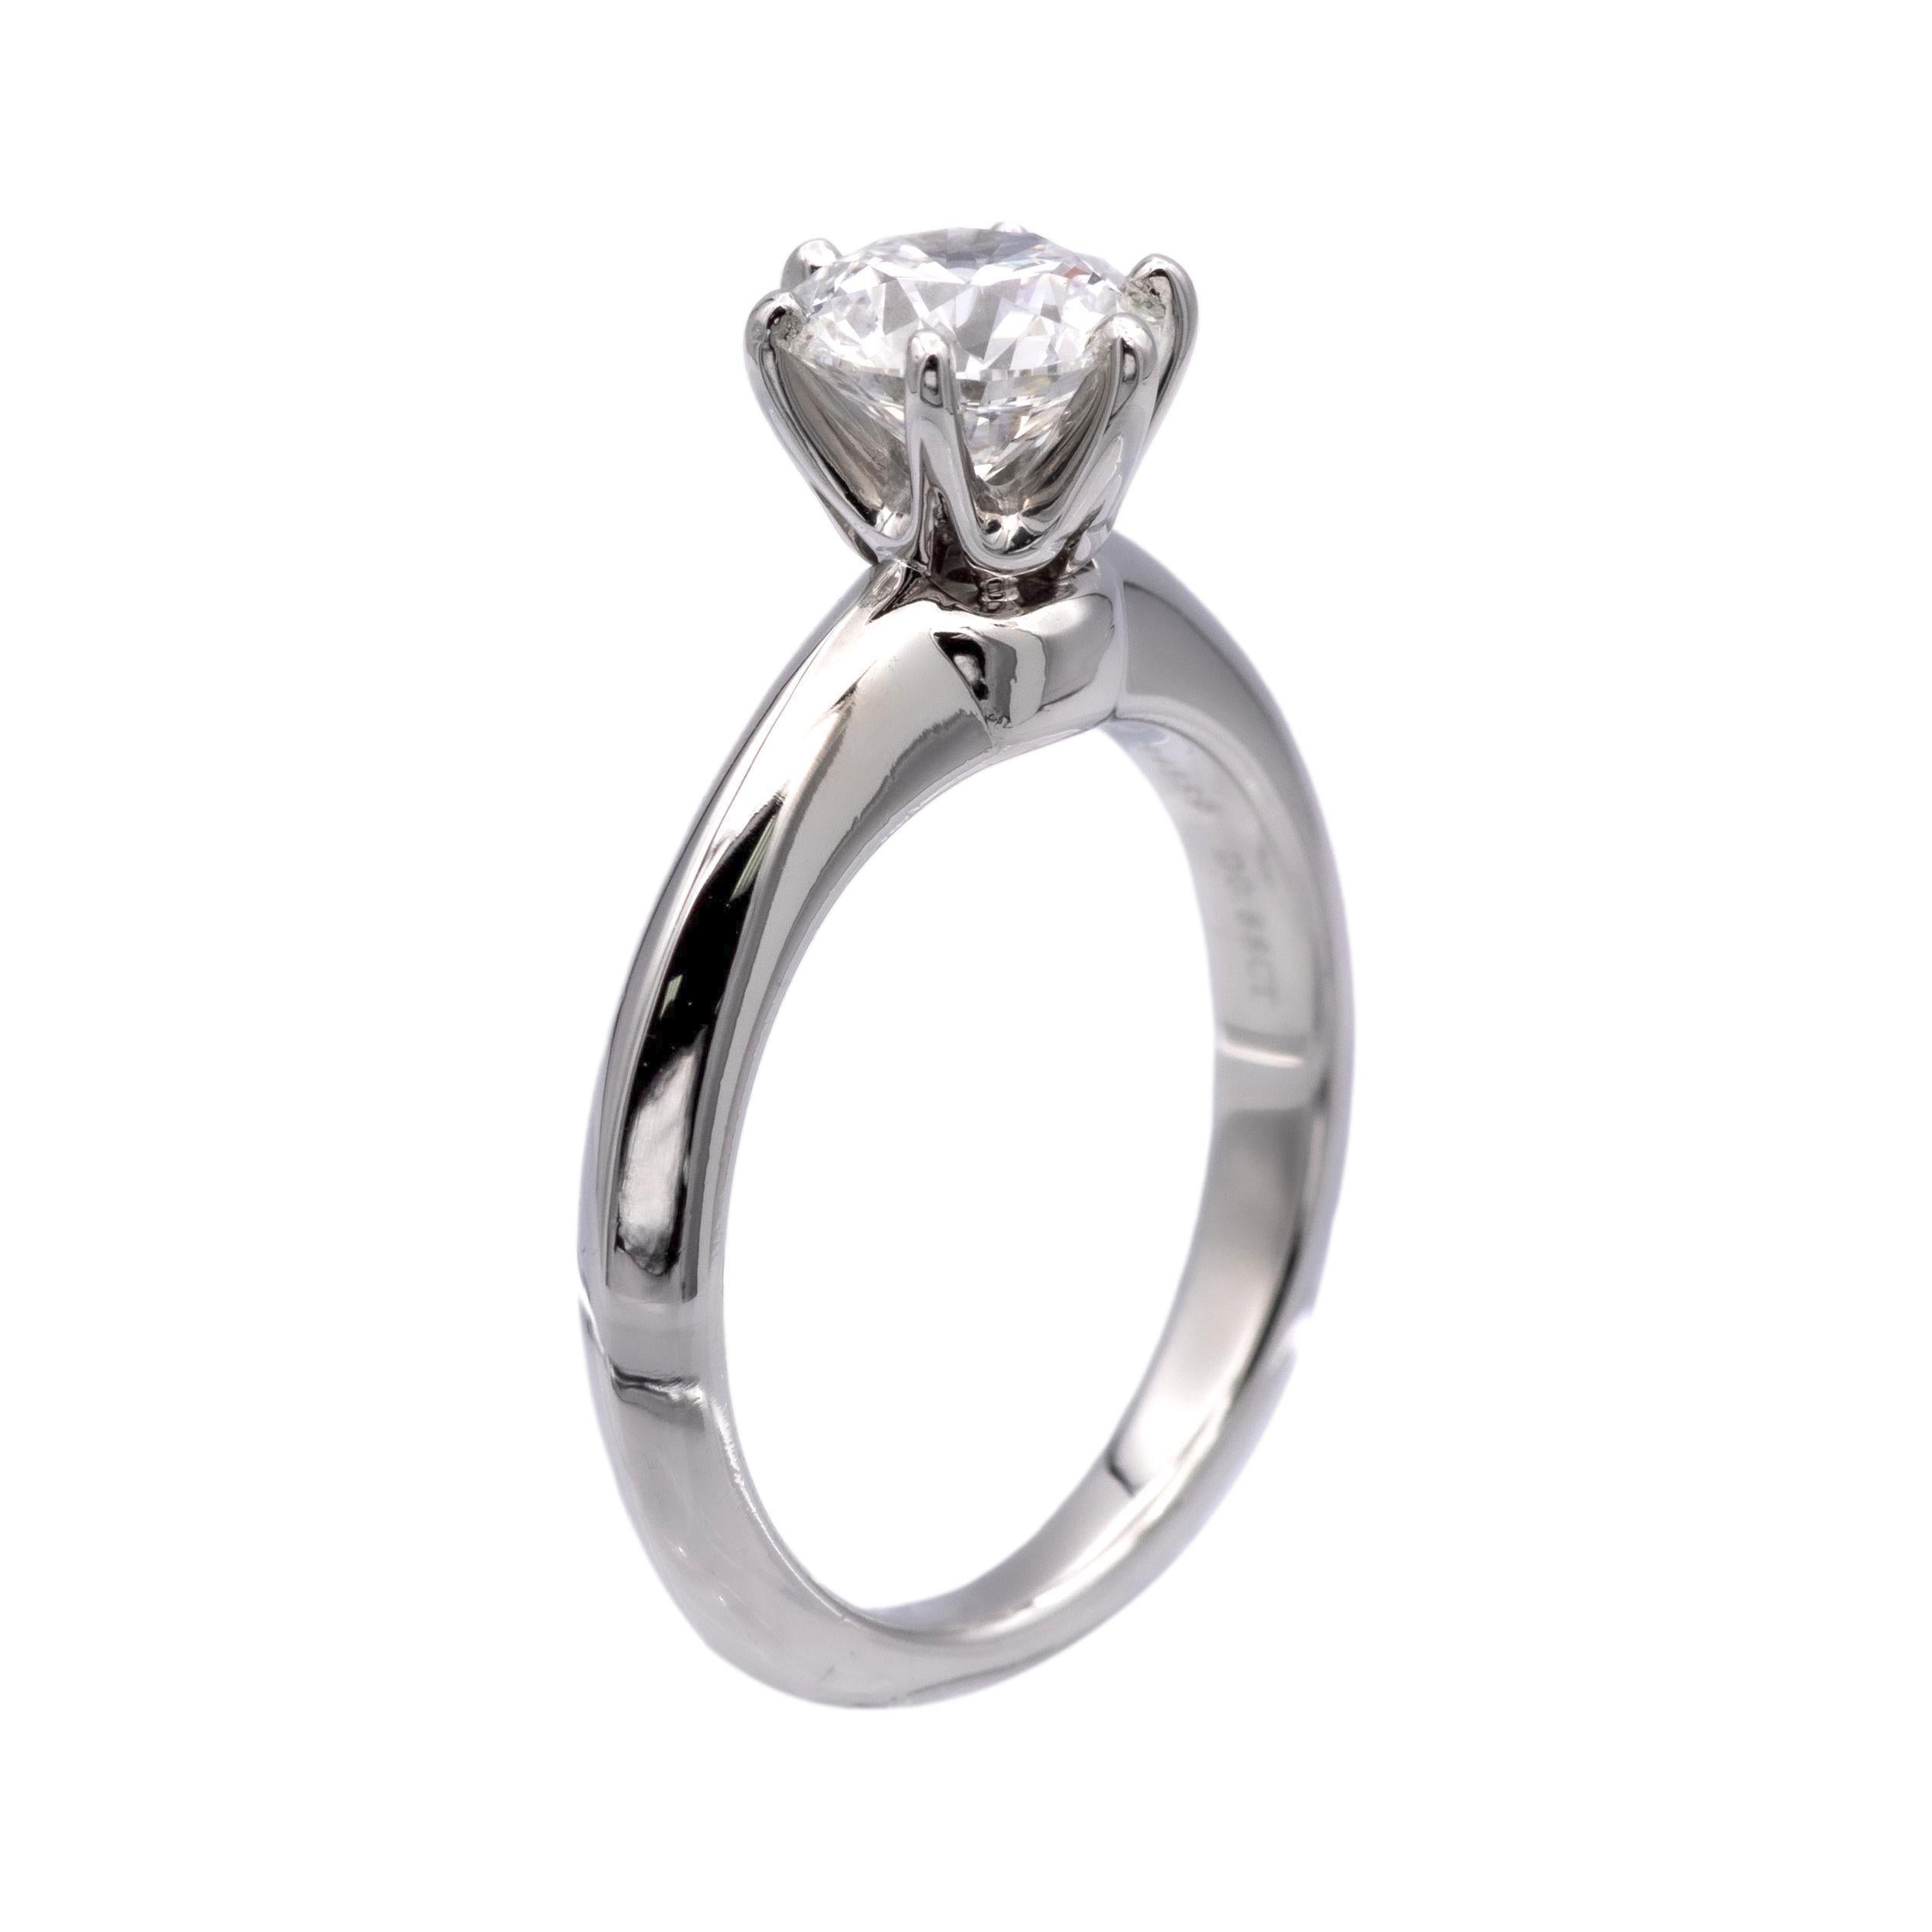 Tiffany & Co. solitaire engagement ring finely crafted in a 6 prong platinum mounting featuring a round brilliant cut center weighing 0.88 carats, G color VVS2 clarity diamond with excellent cut , polish and symmetry. Fully hallmarked with logo,